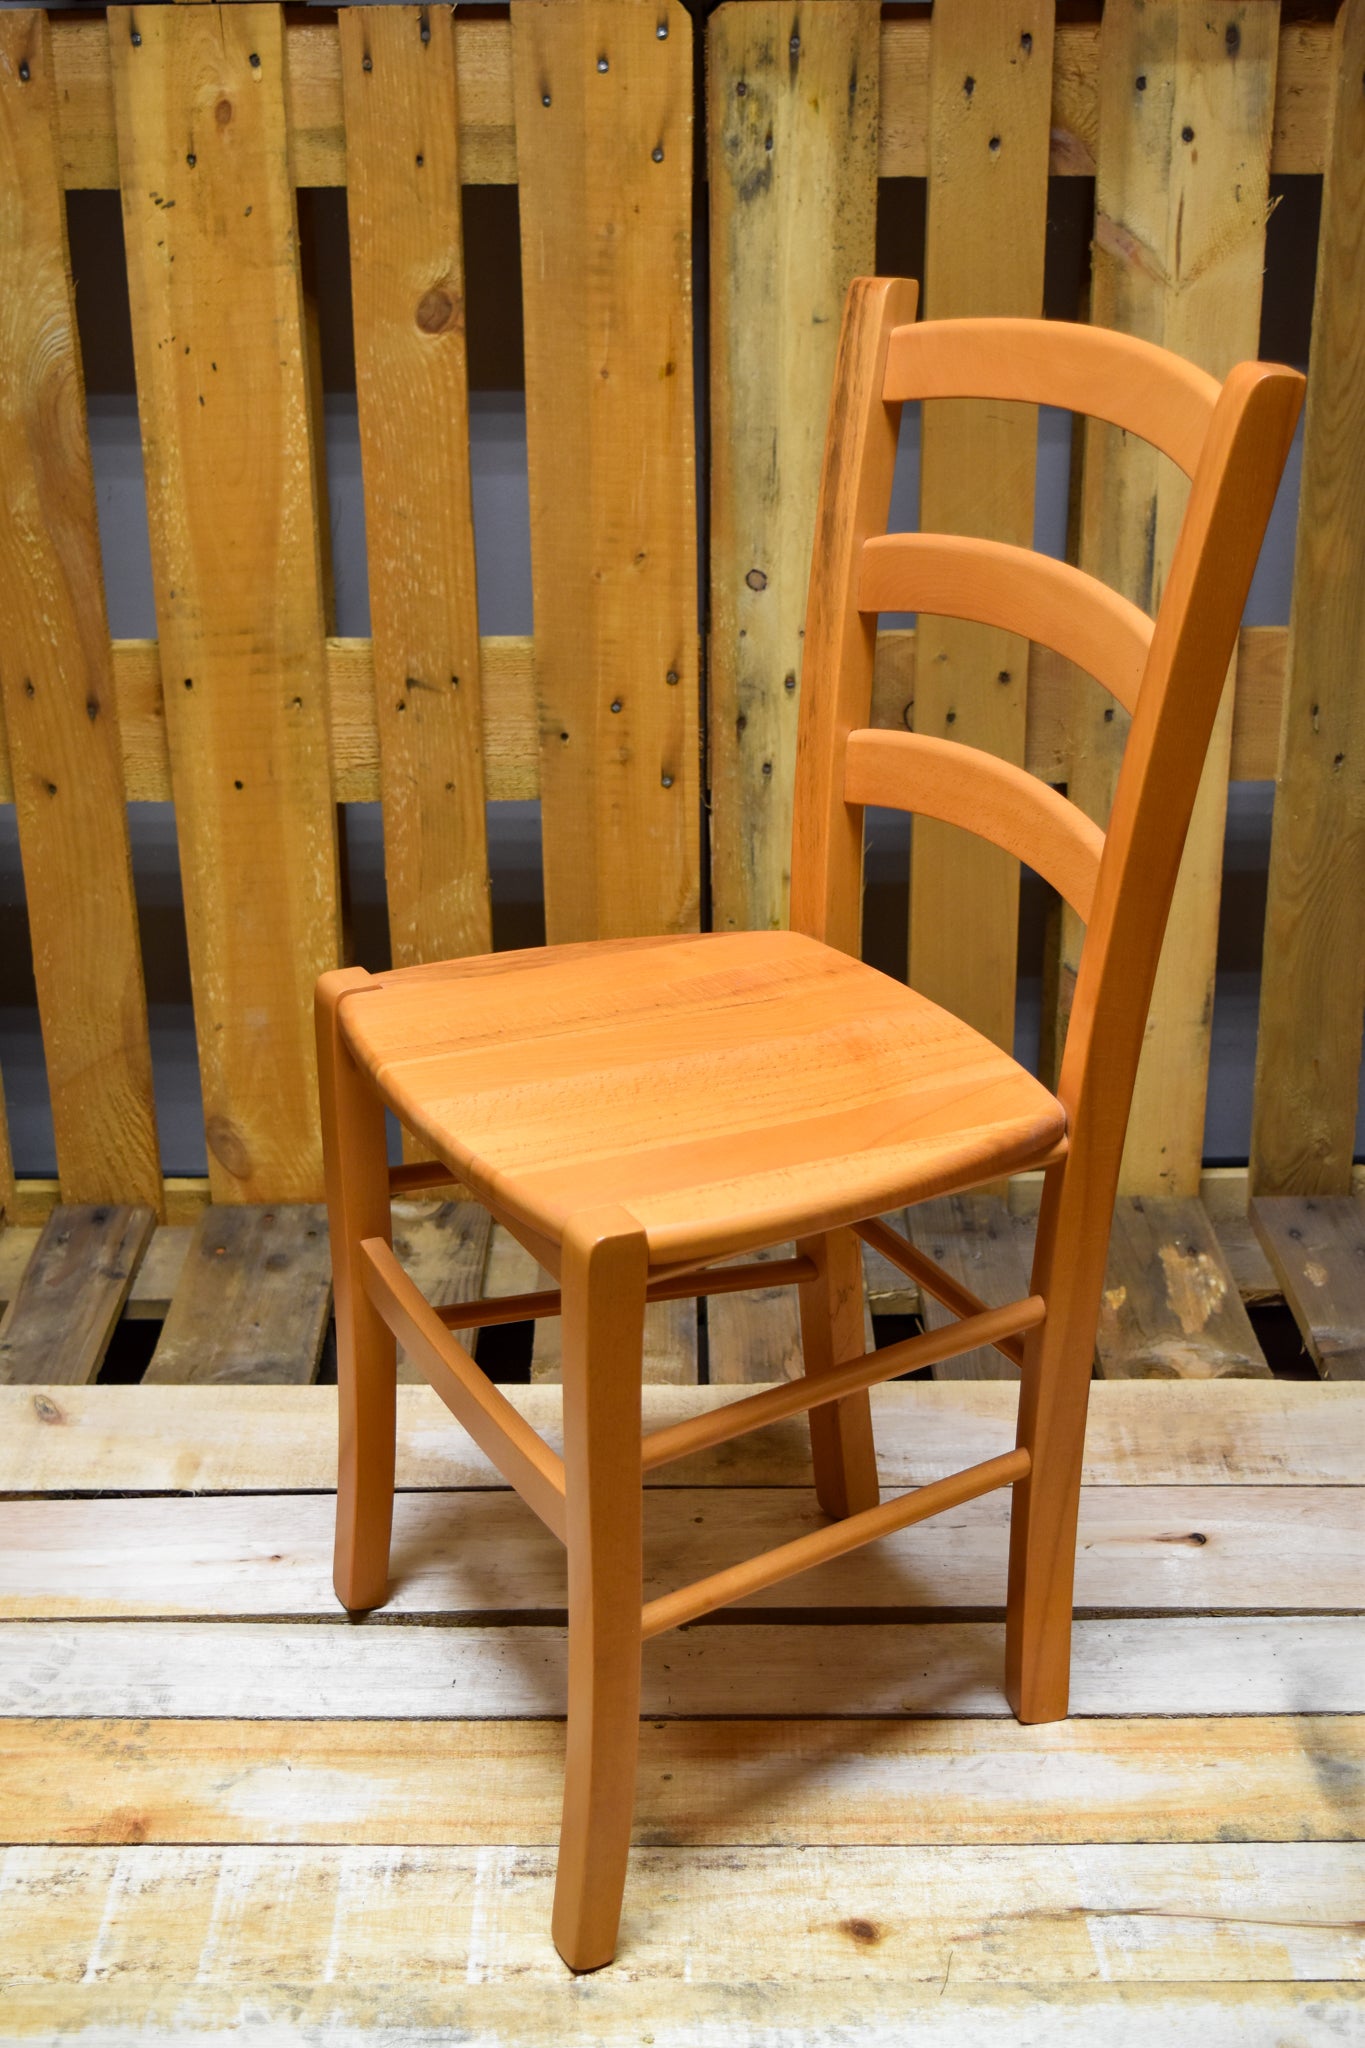 Stock chairs model 14 honey color wooden seat